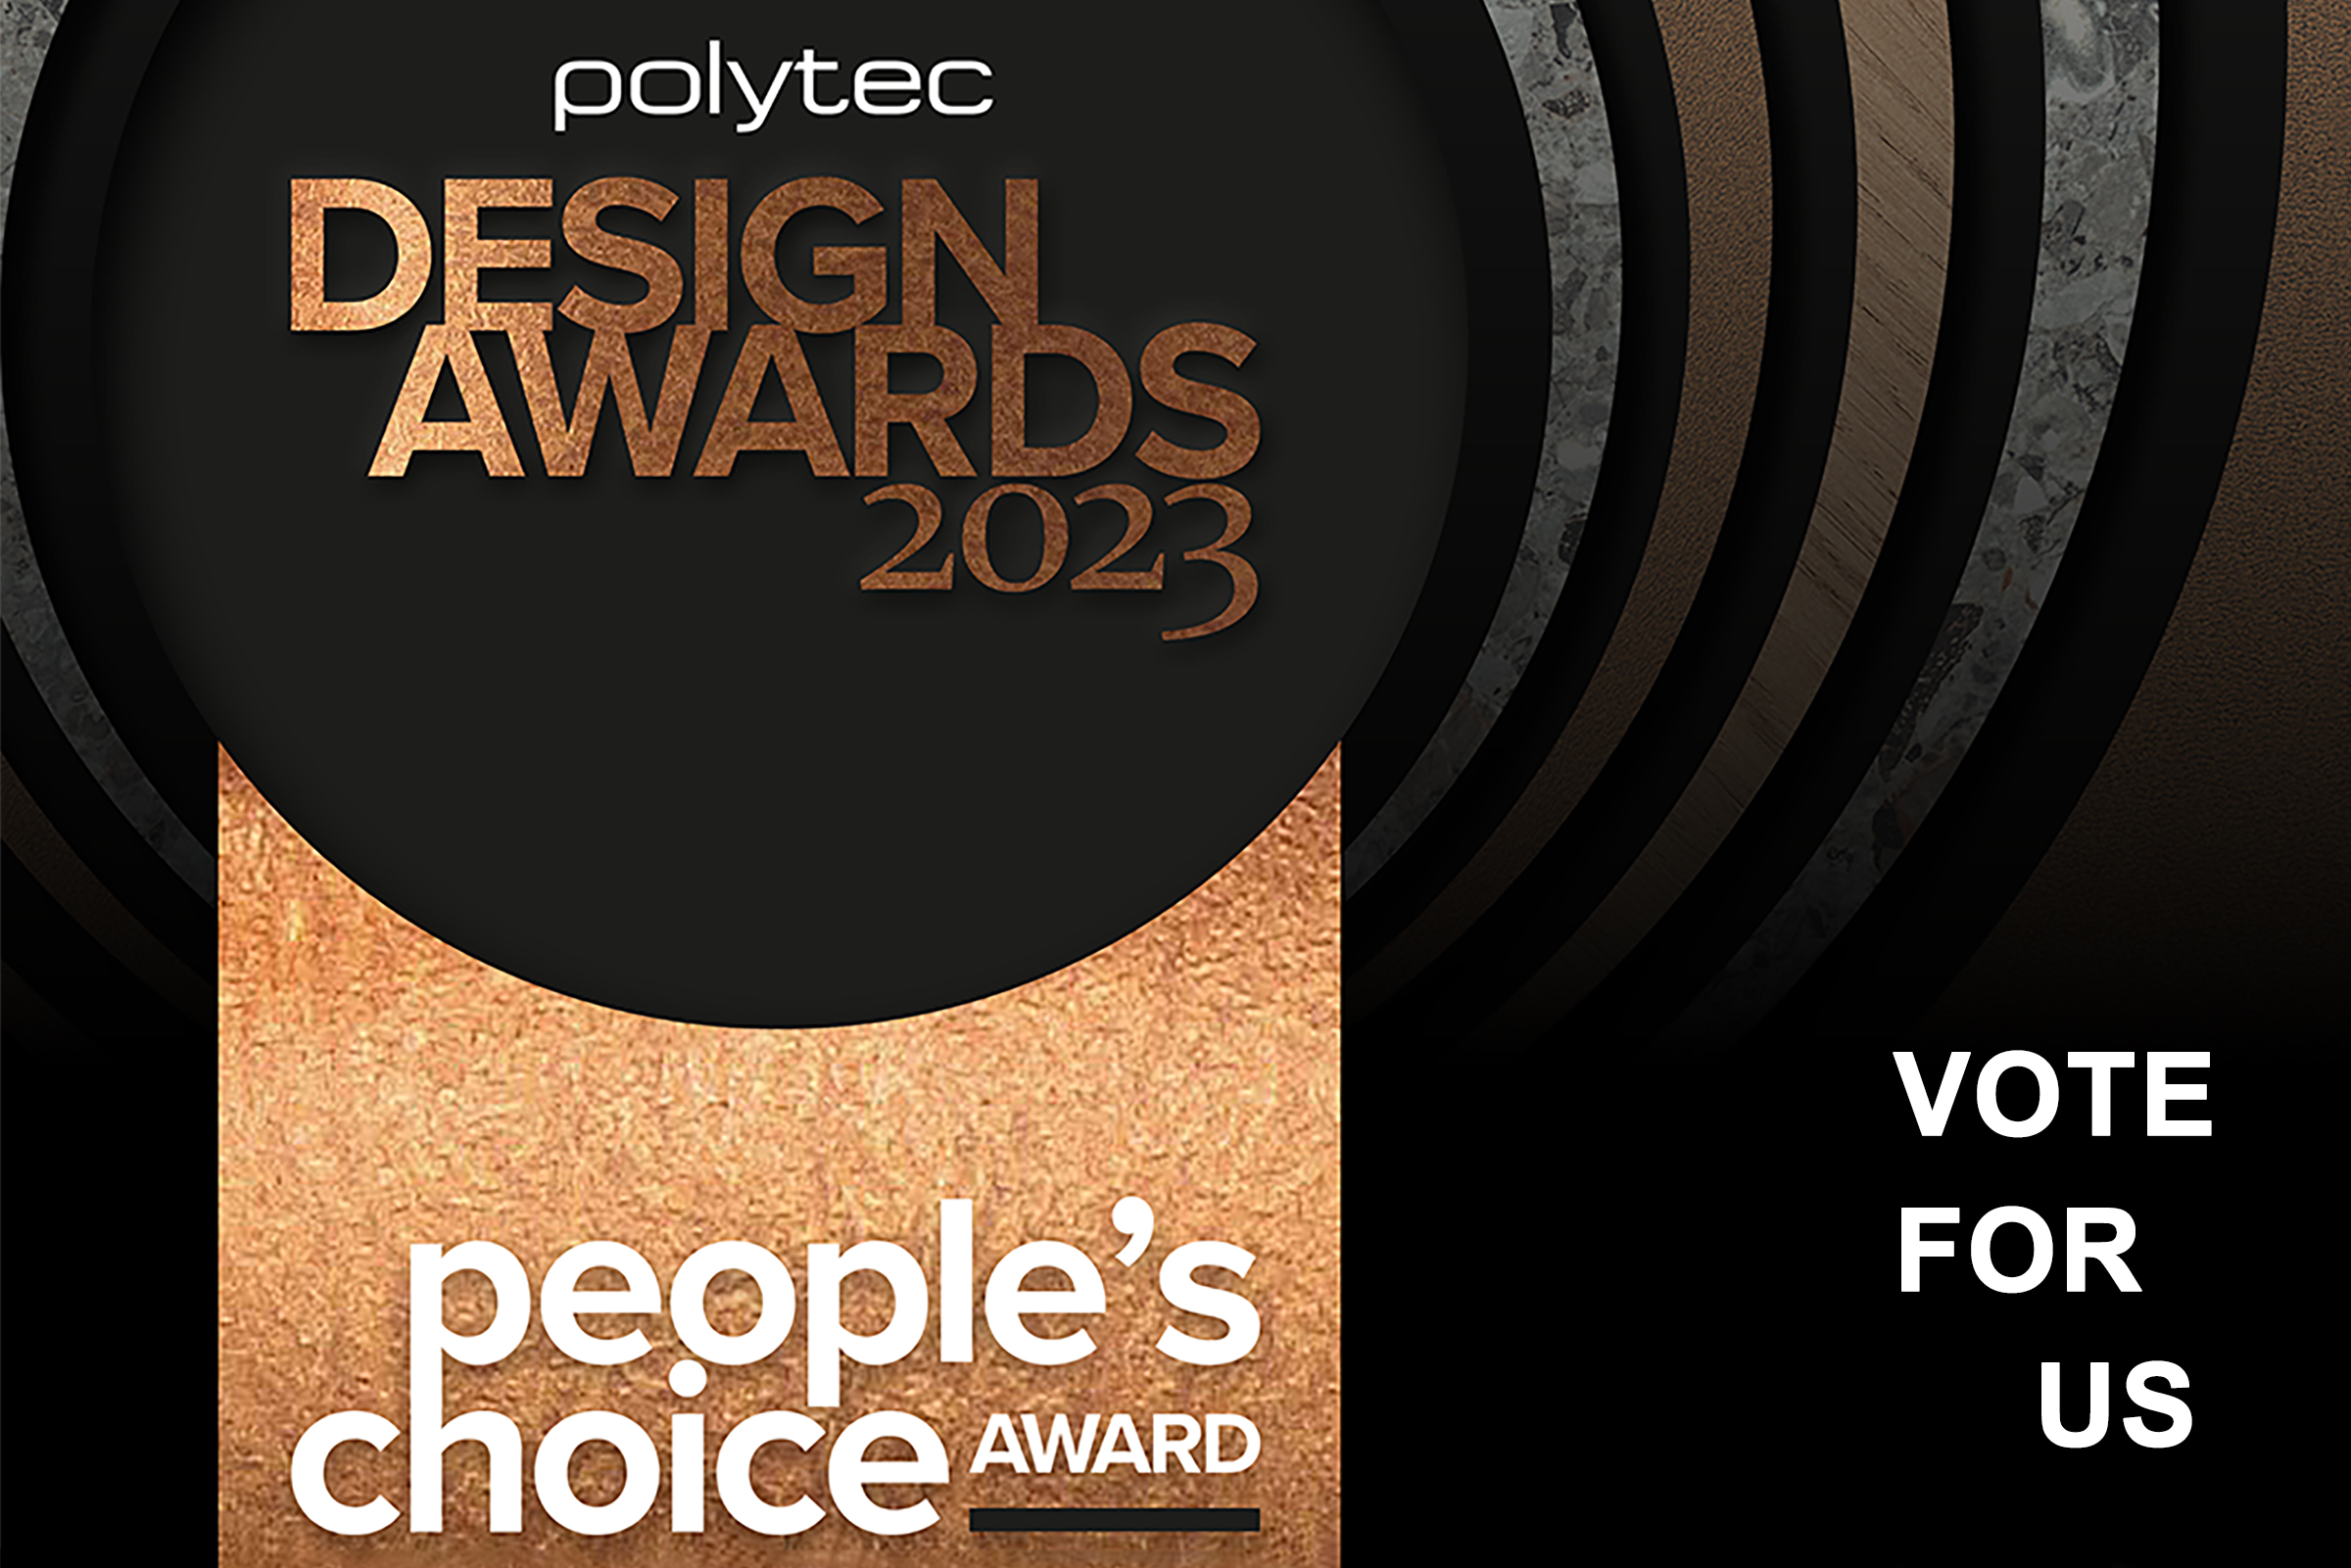 polytec design awards vote for our project